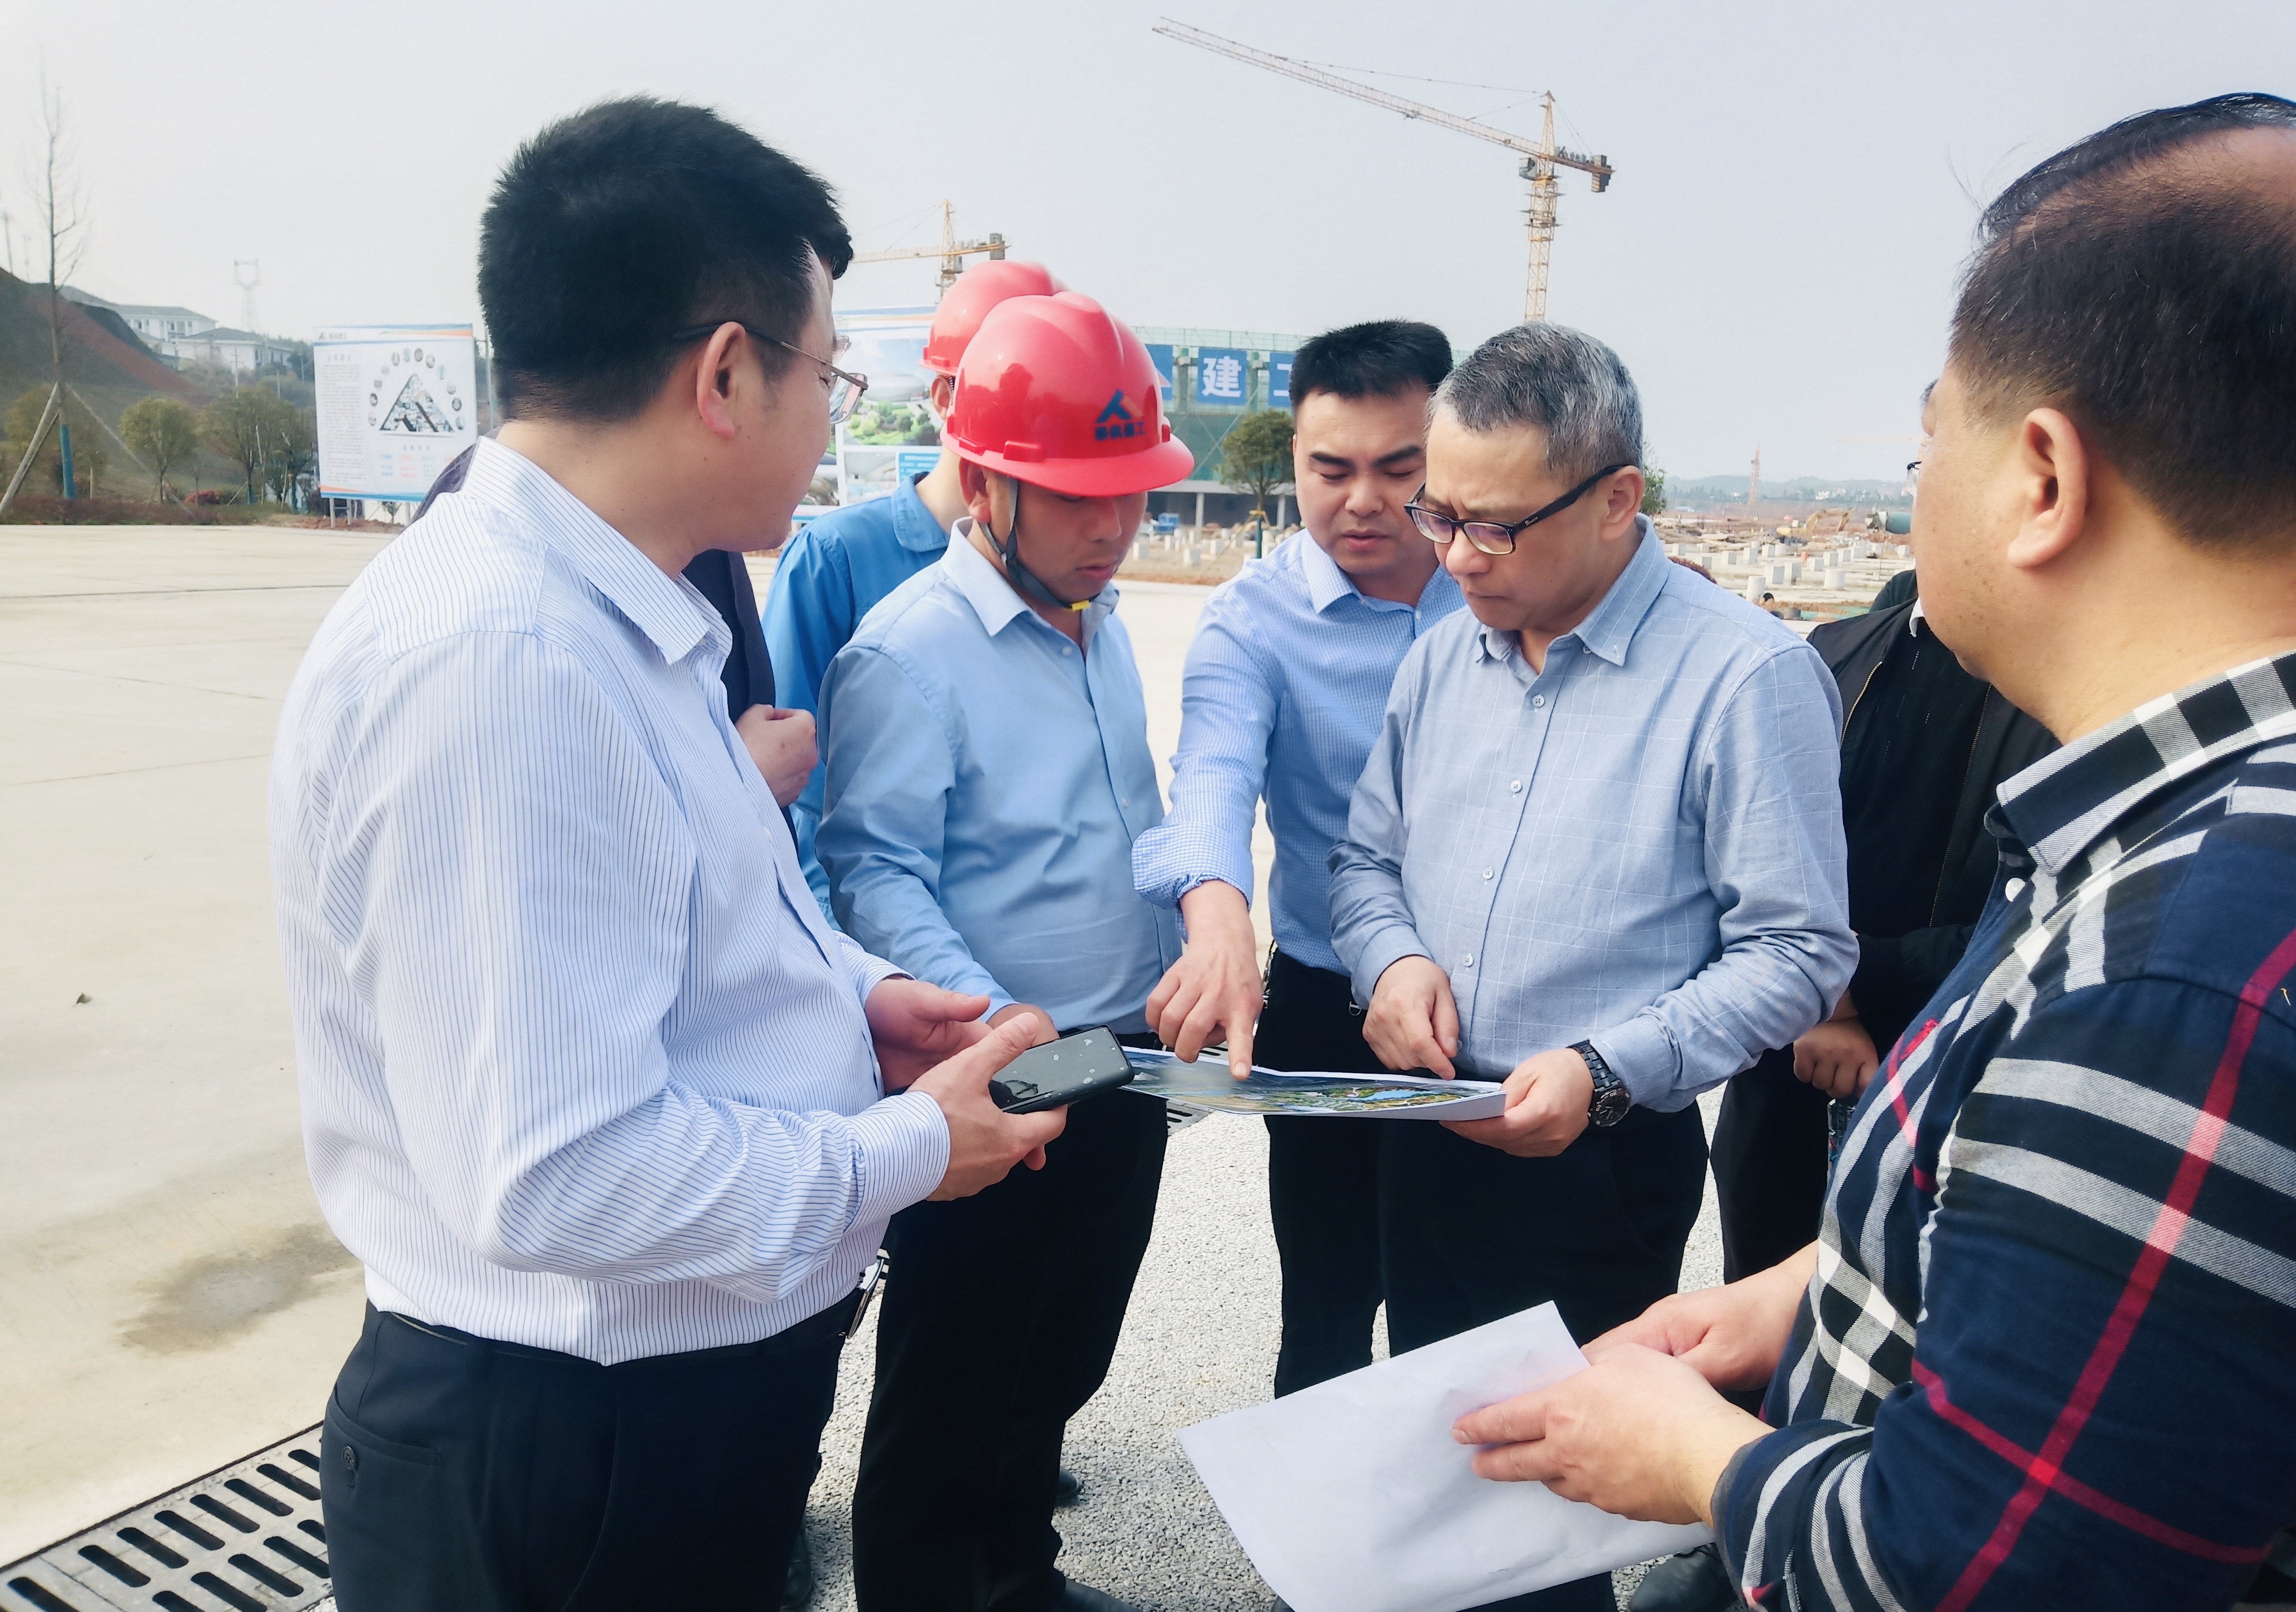 Yichun City Government Deputy Secretary-General Yang Xu and his party came to our company for construction project inspection